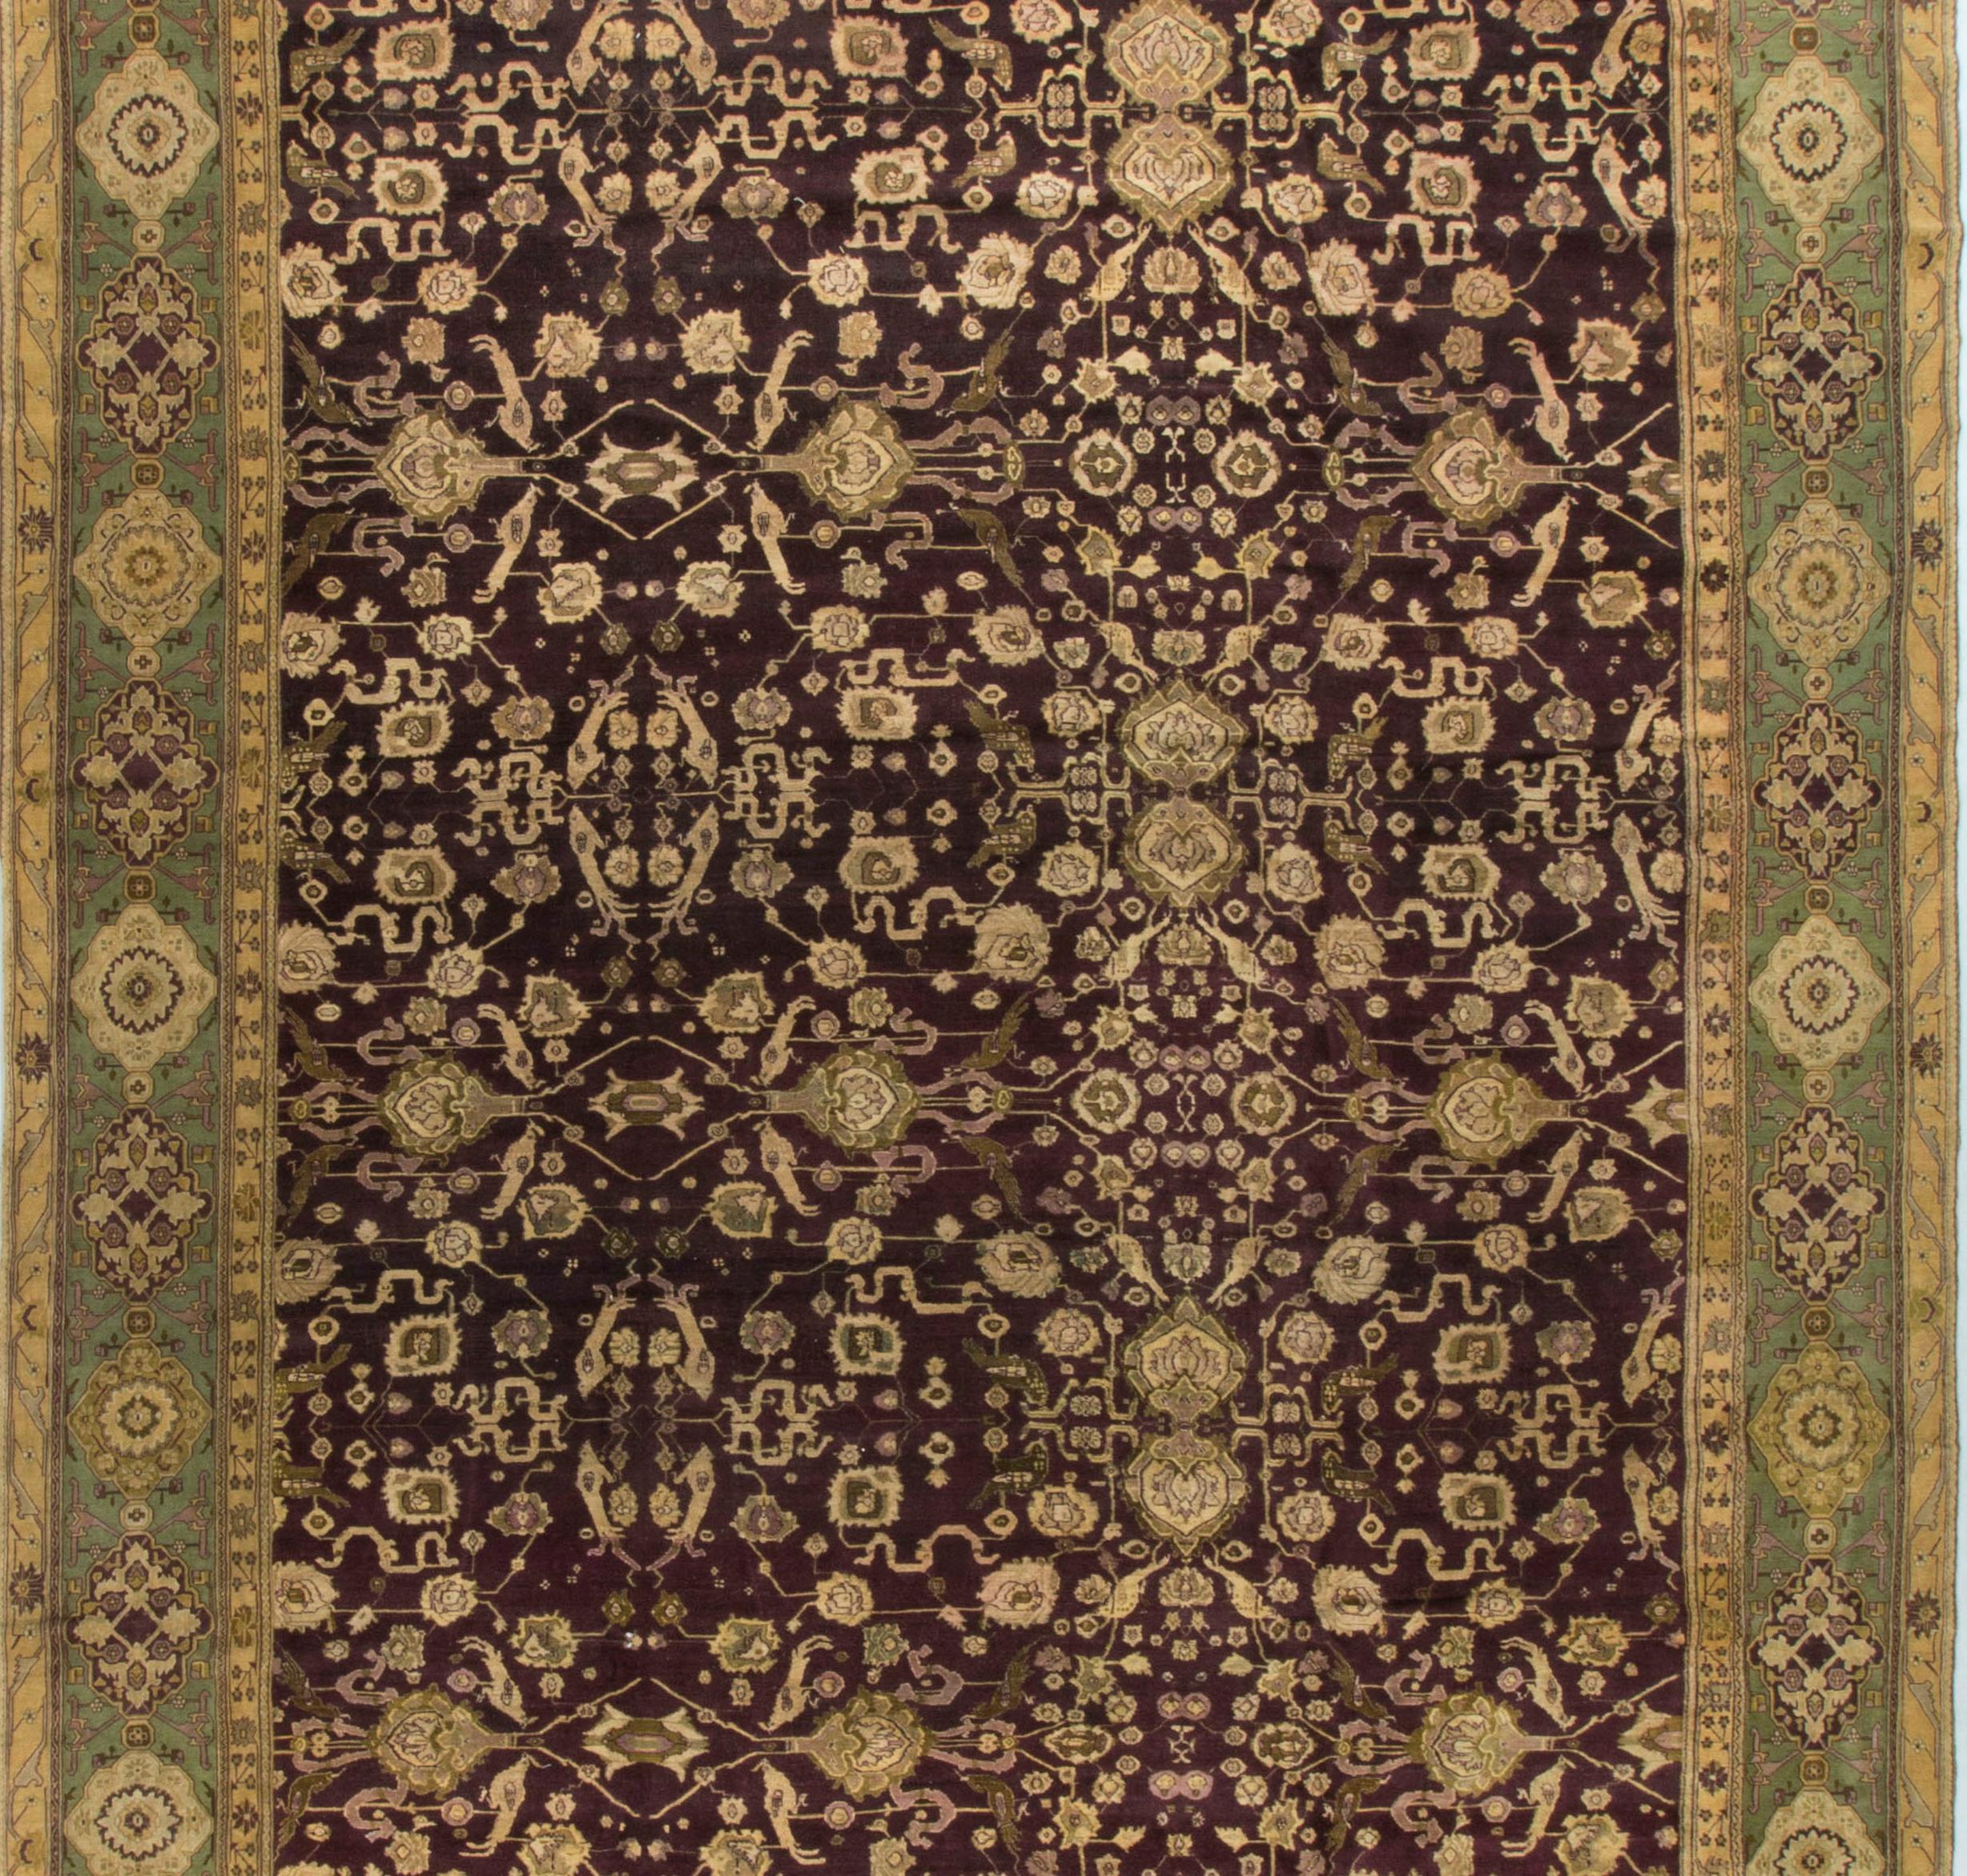 This rug has all the attributes of an Agra rug from this time period. The deep red colors, known as Agra Red, the border colors and the designs go to create a style that has maintained its popularity and which makes these genuine pieces so hard to